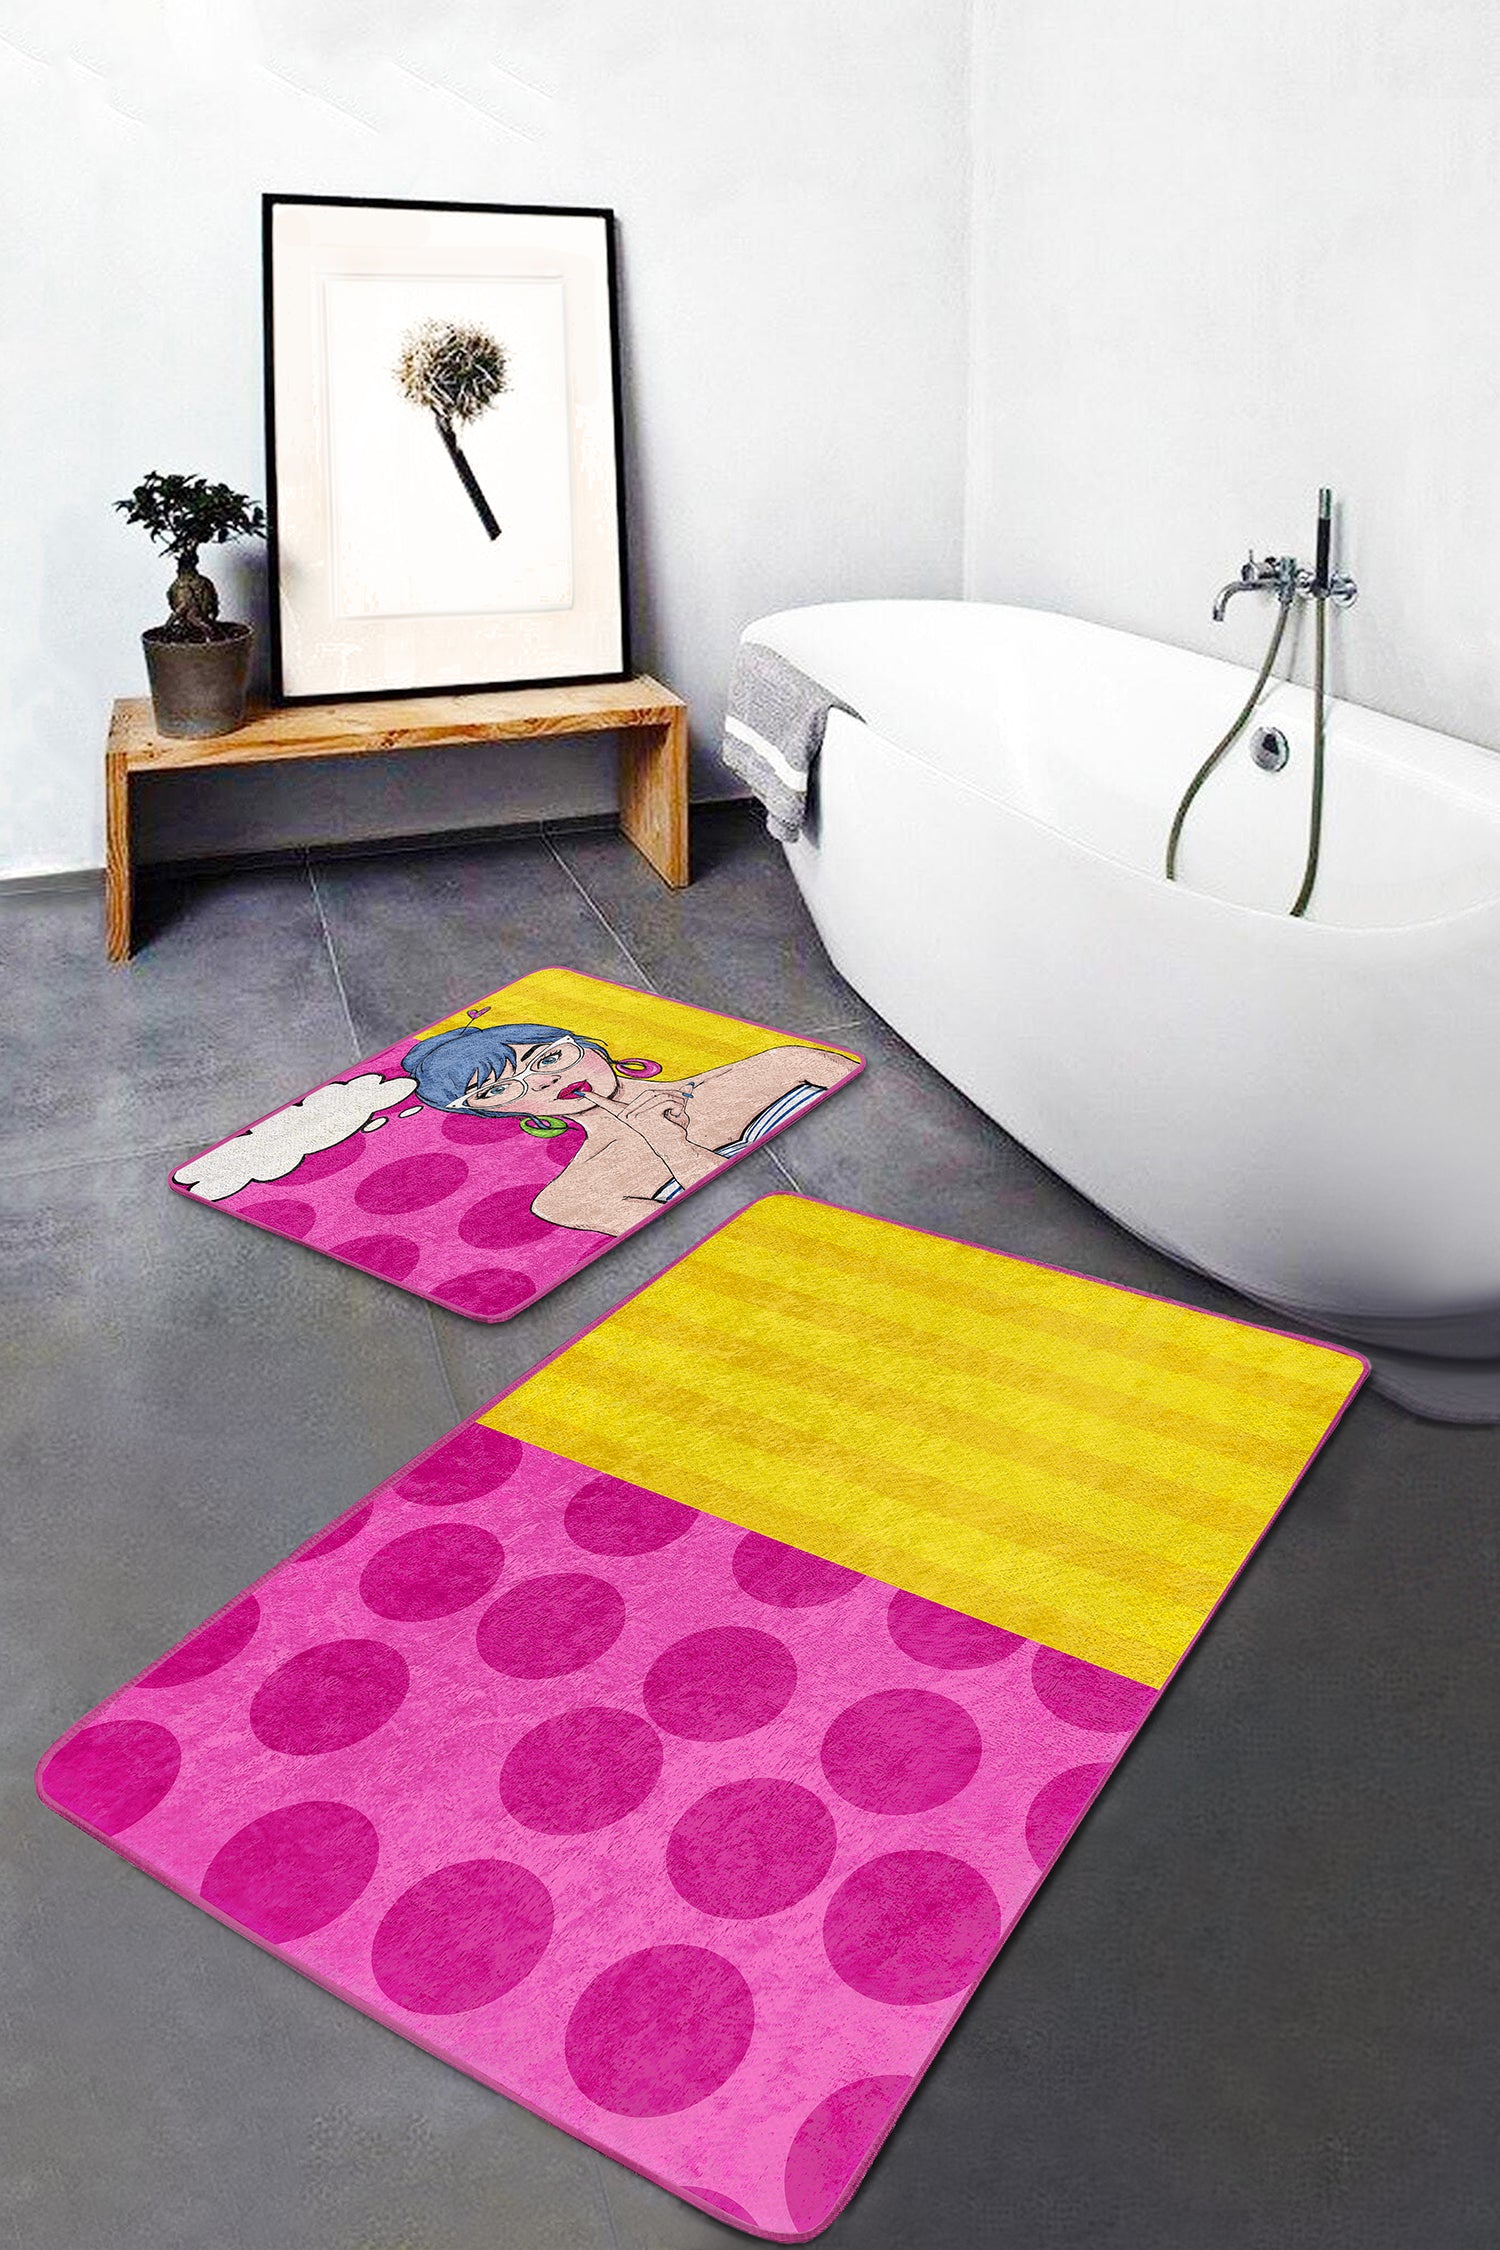 High-Quality Pop Art Bath Mat for Stylish and Energetic Decor